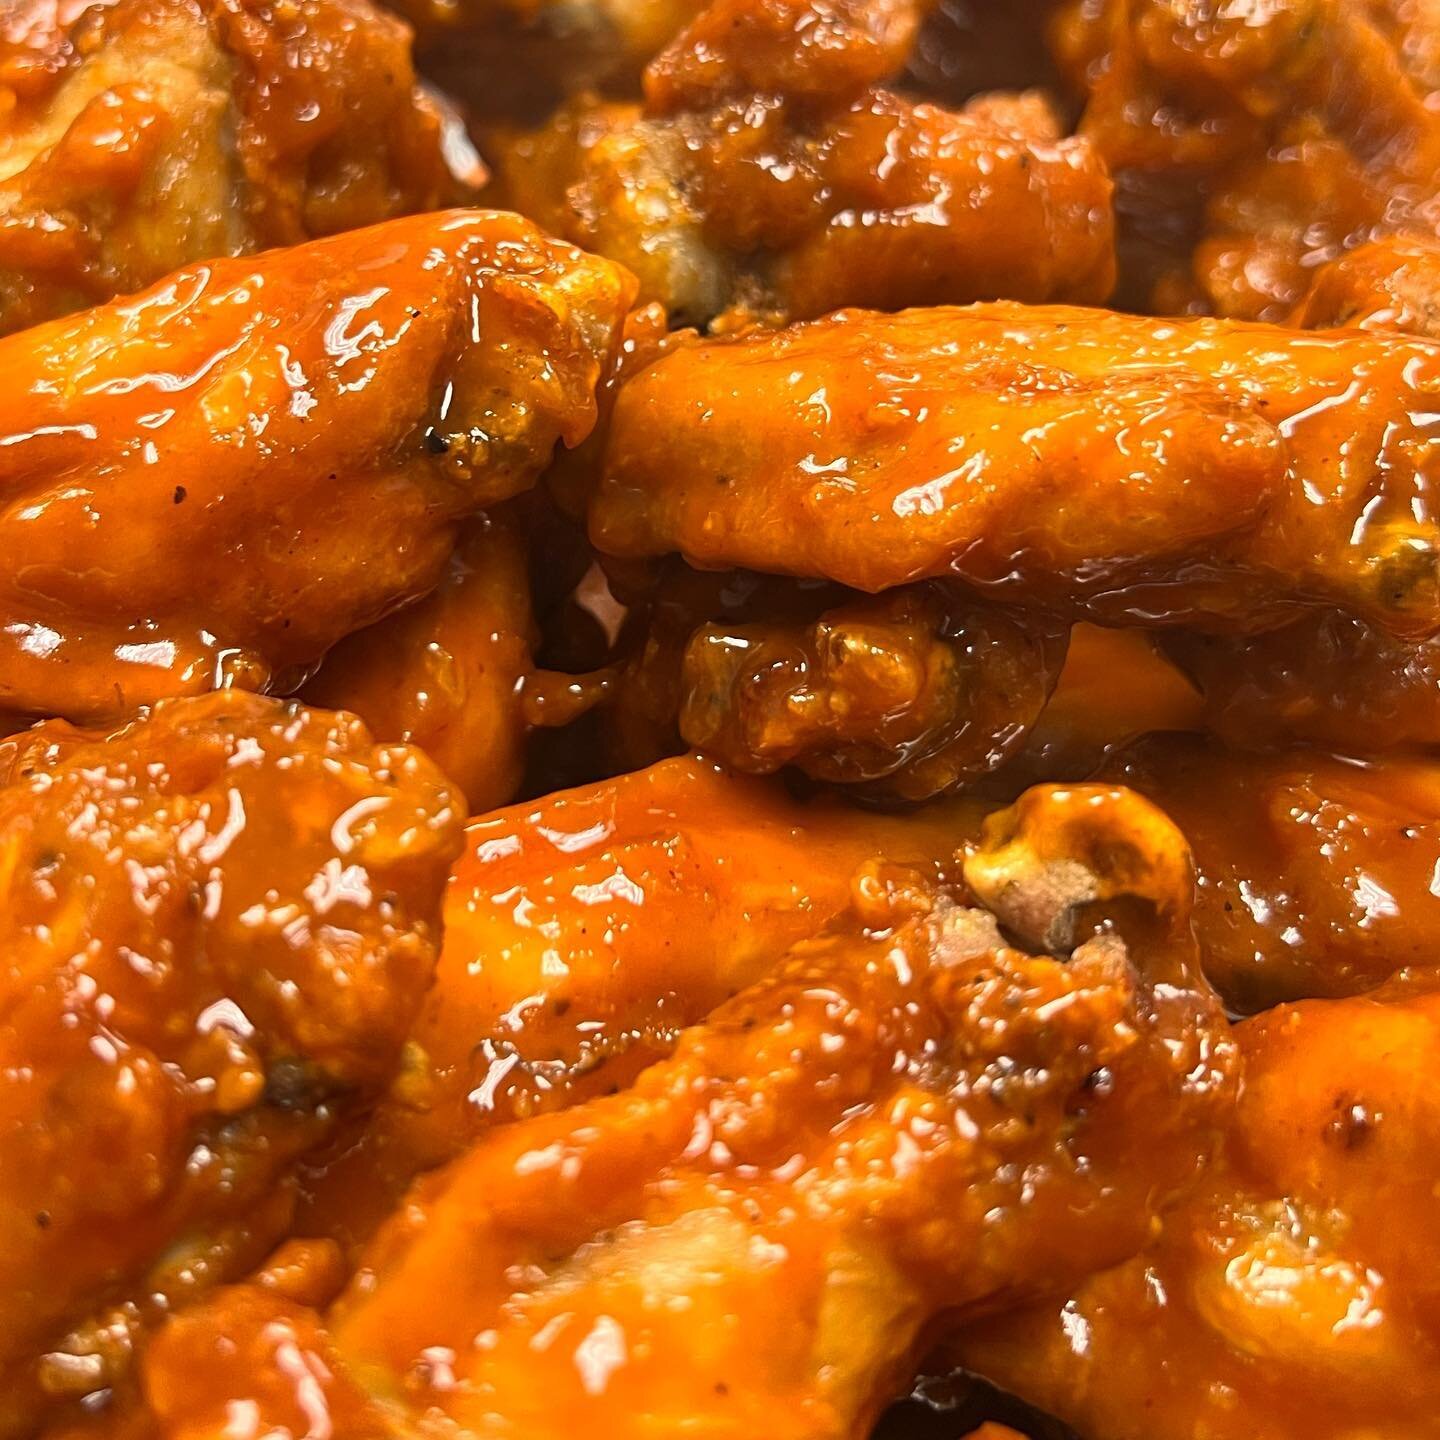 Saucy. Messy. Tasty. 🤤 Wing &amp; Shrimp Monday specials are in full swing and the perfect treat to watch Chicago BEAT Milwaukee ⚾️ Cubs V Brewers starts at 7:05pm!